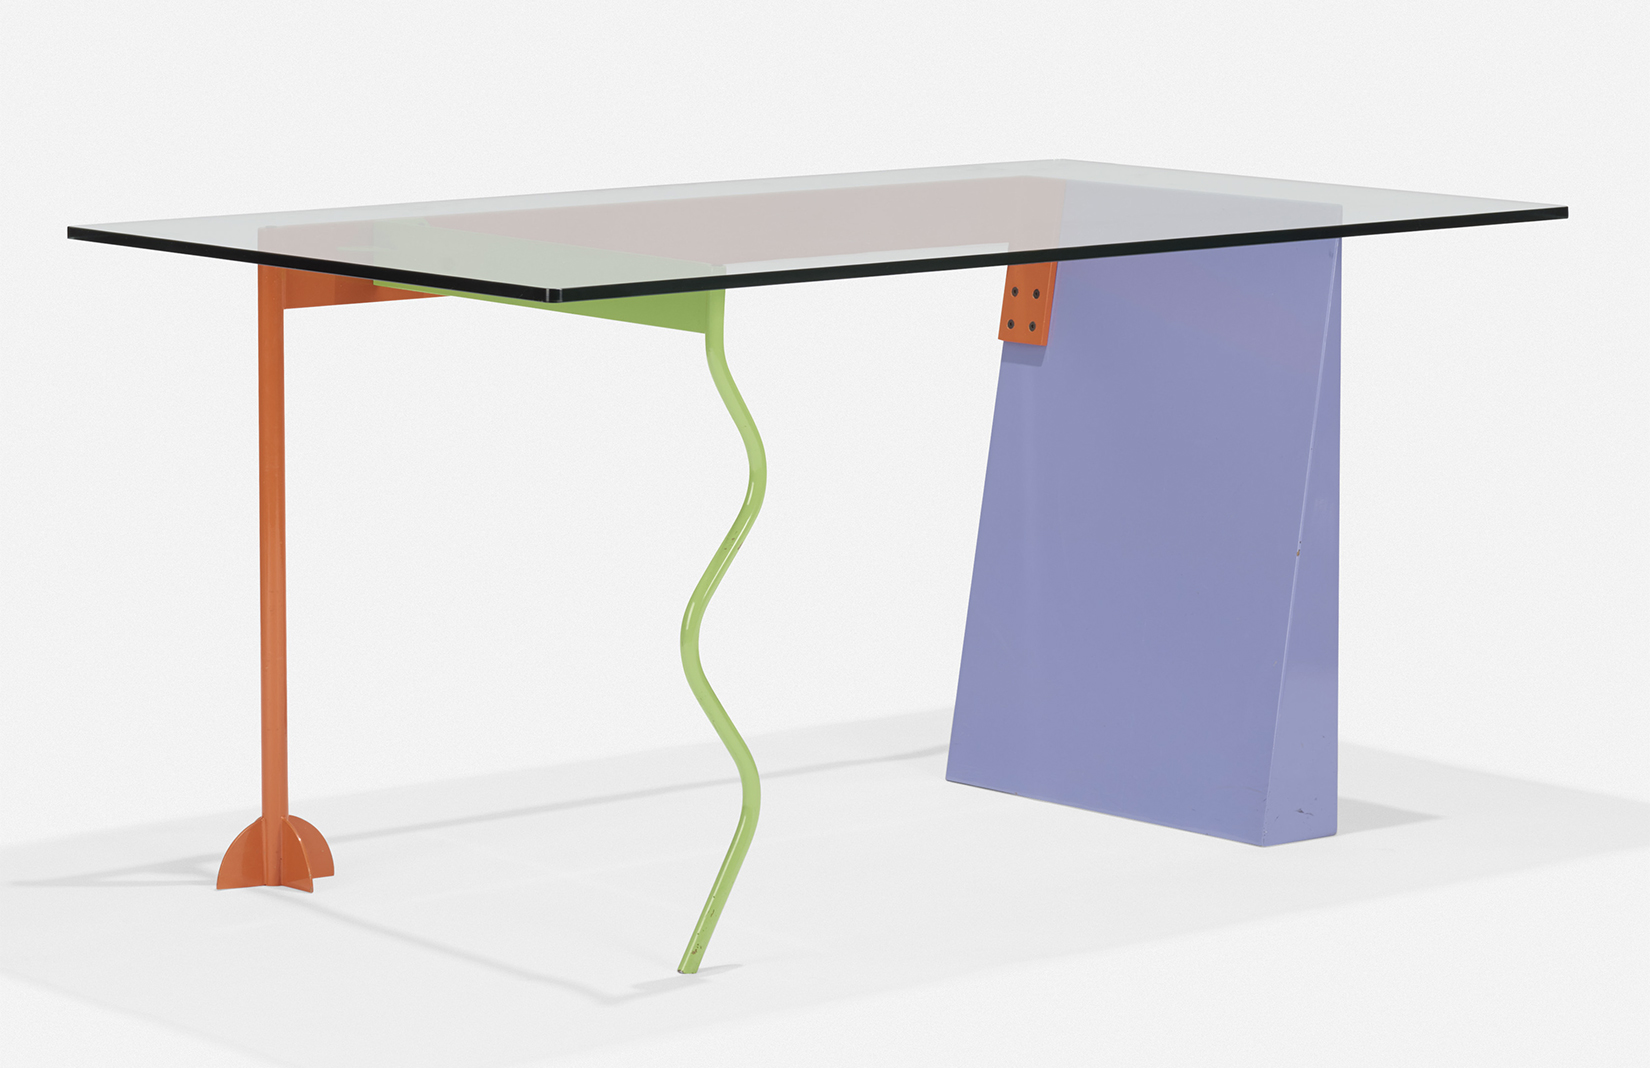 Lot 116. Peninsula table by Peter Shire, estimate: $2,000–3,000